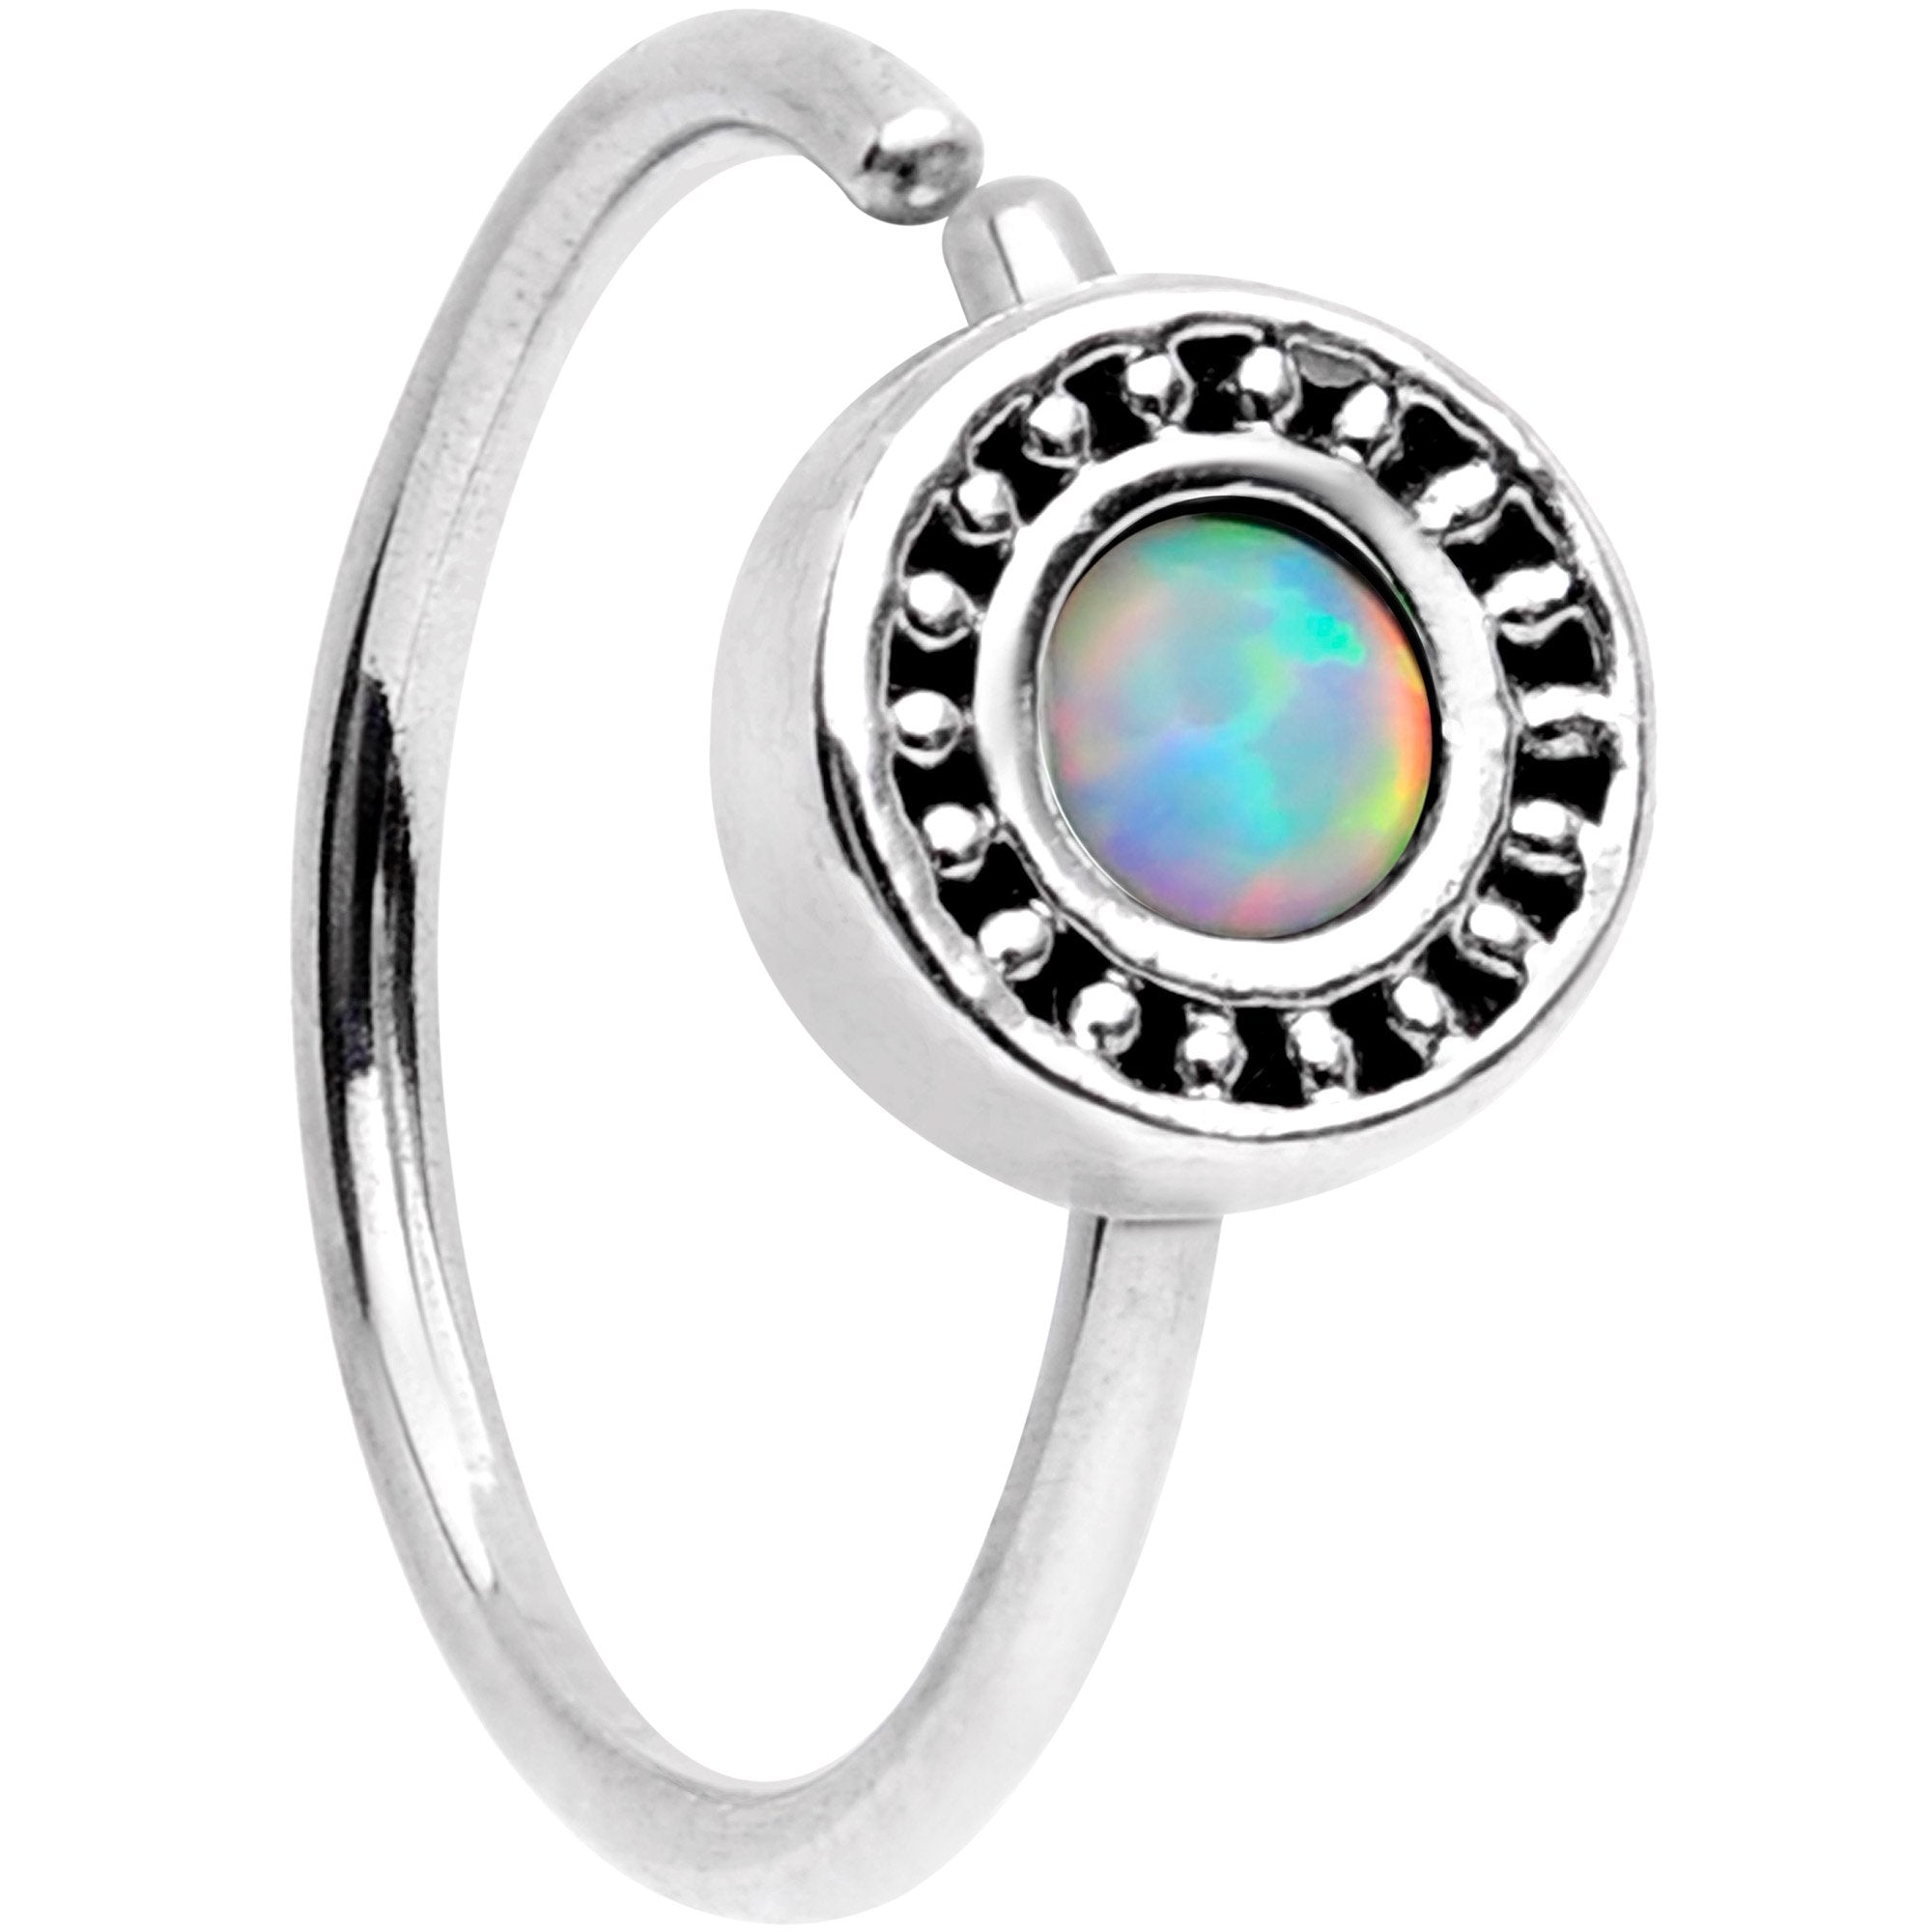 20 Gauge 5/16 White Synthetic Opal Inlay Seamless Circular Ring